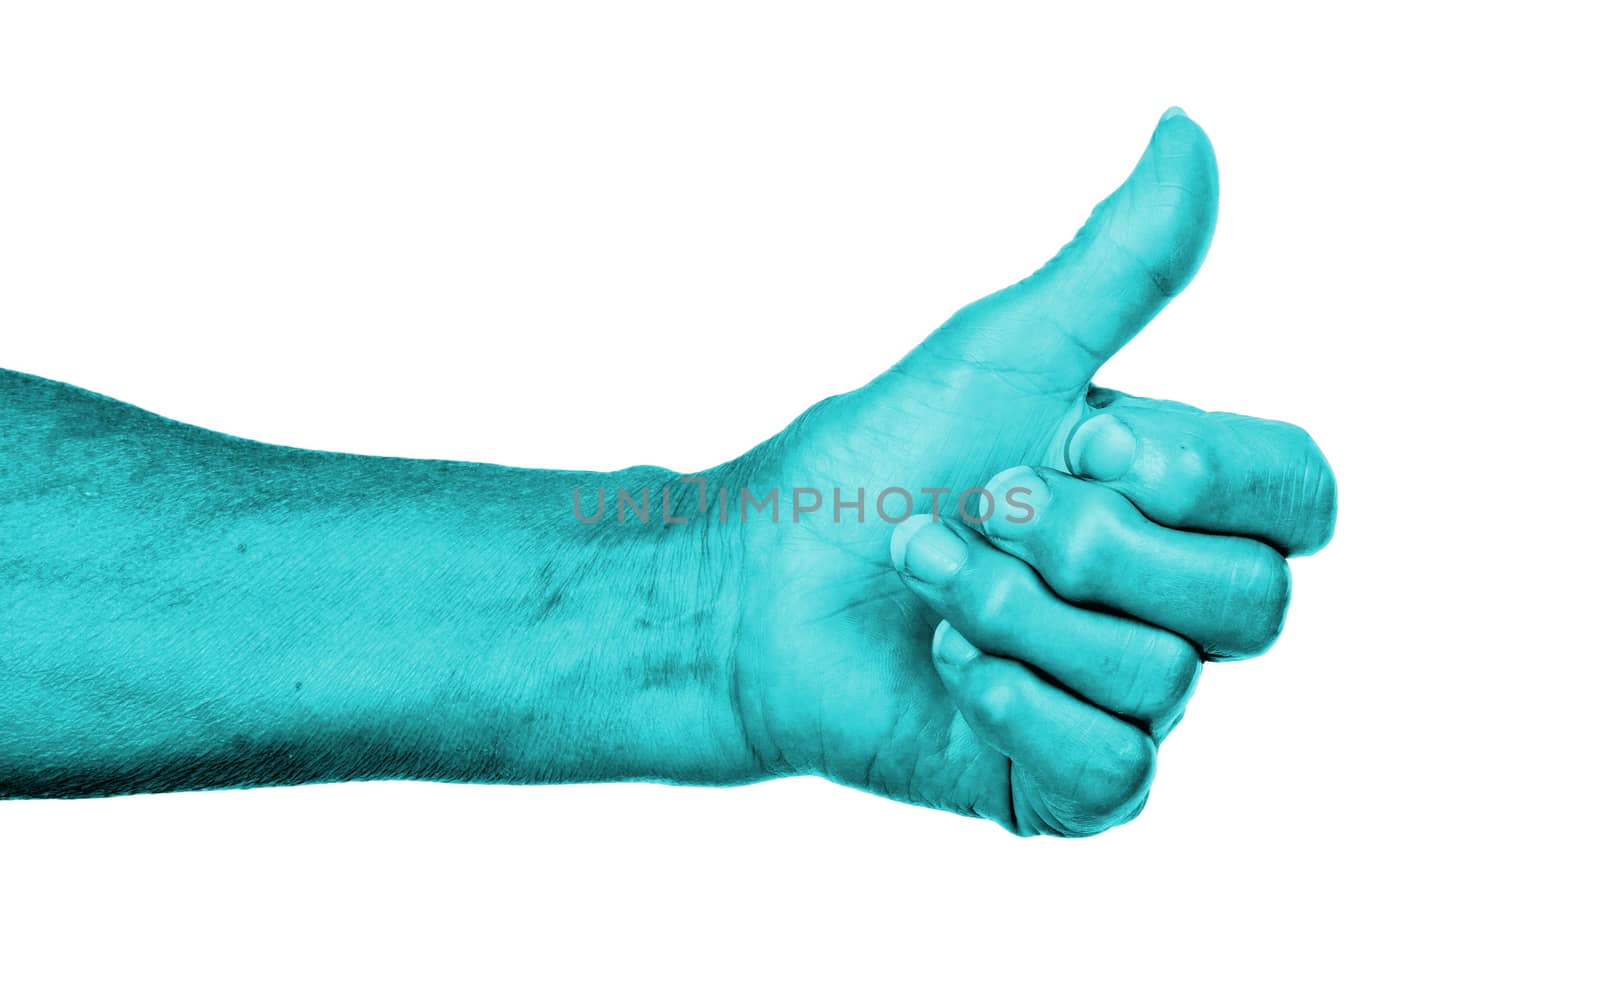 Old woman with arthritis giving the thumbs up sign, blue skin